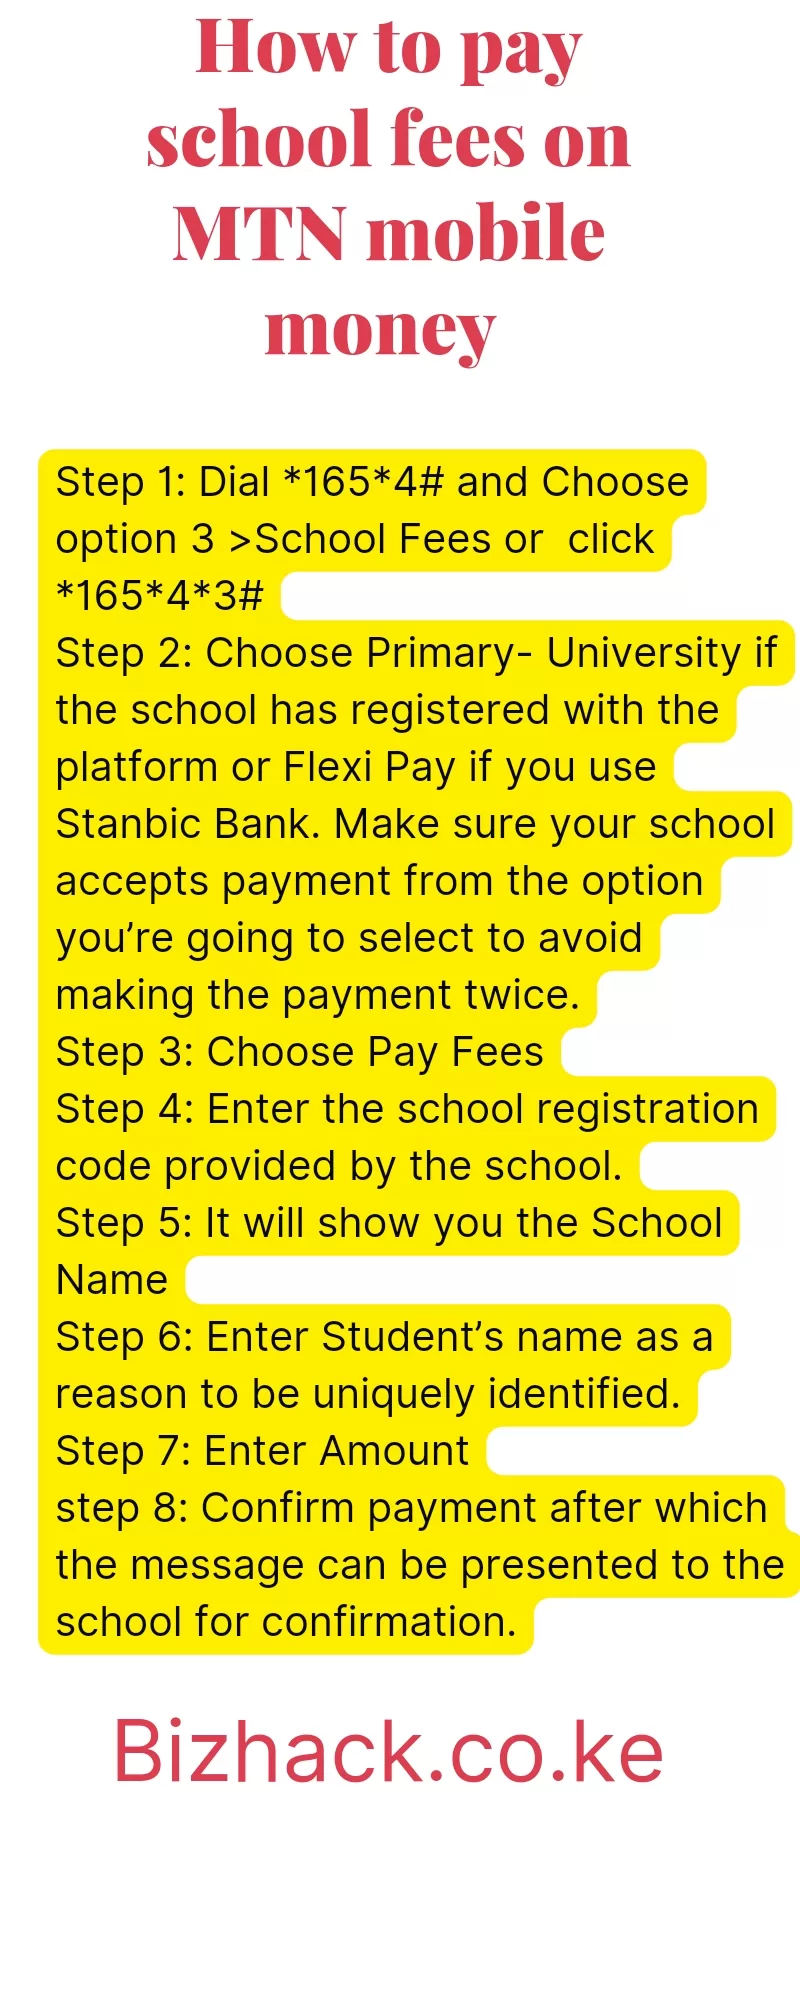 How to Pay School Fees Via MTN Mobile Money